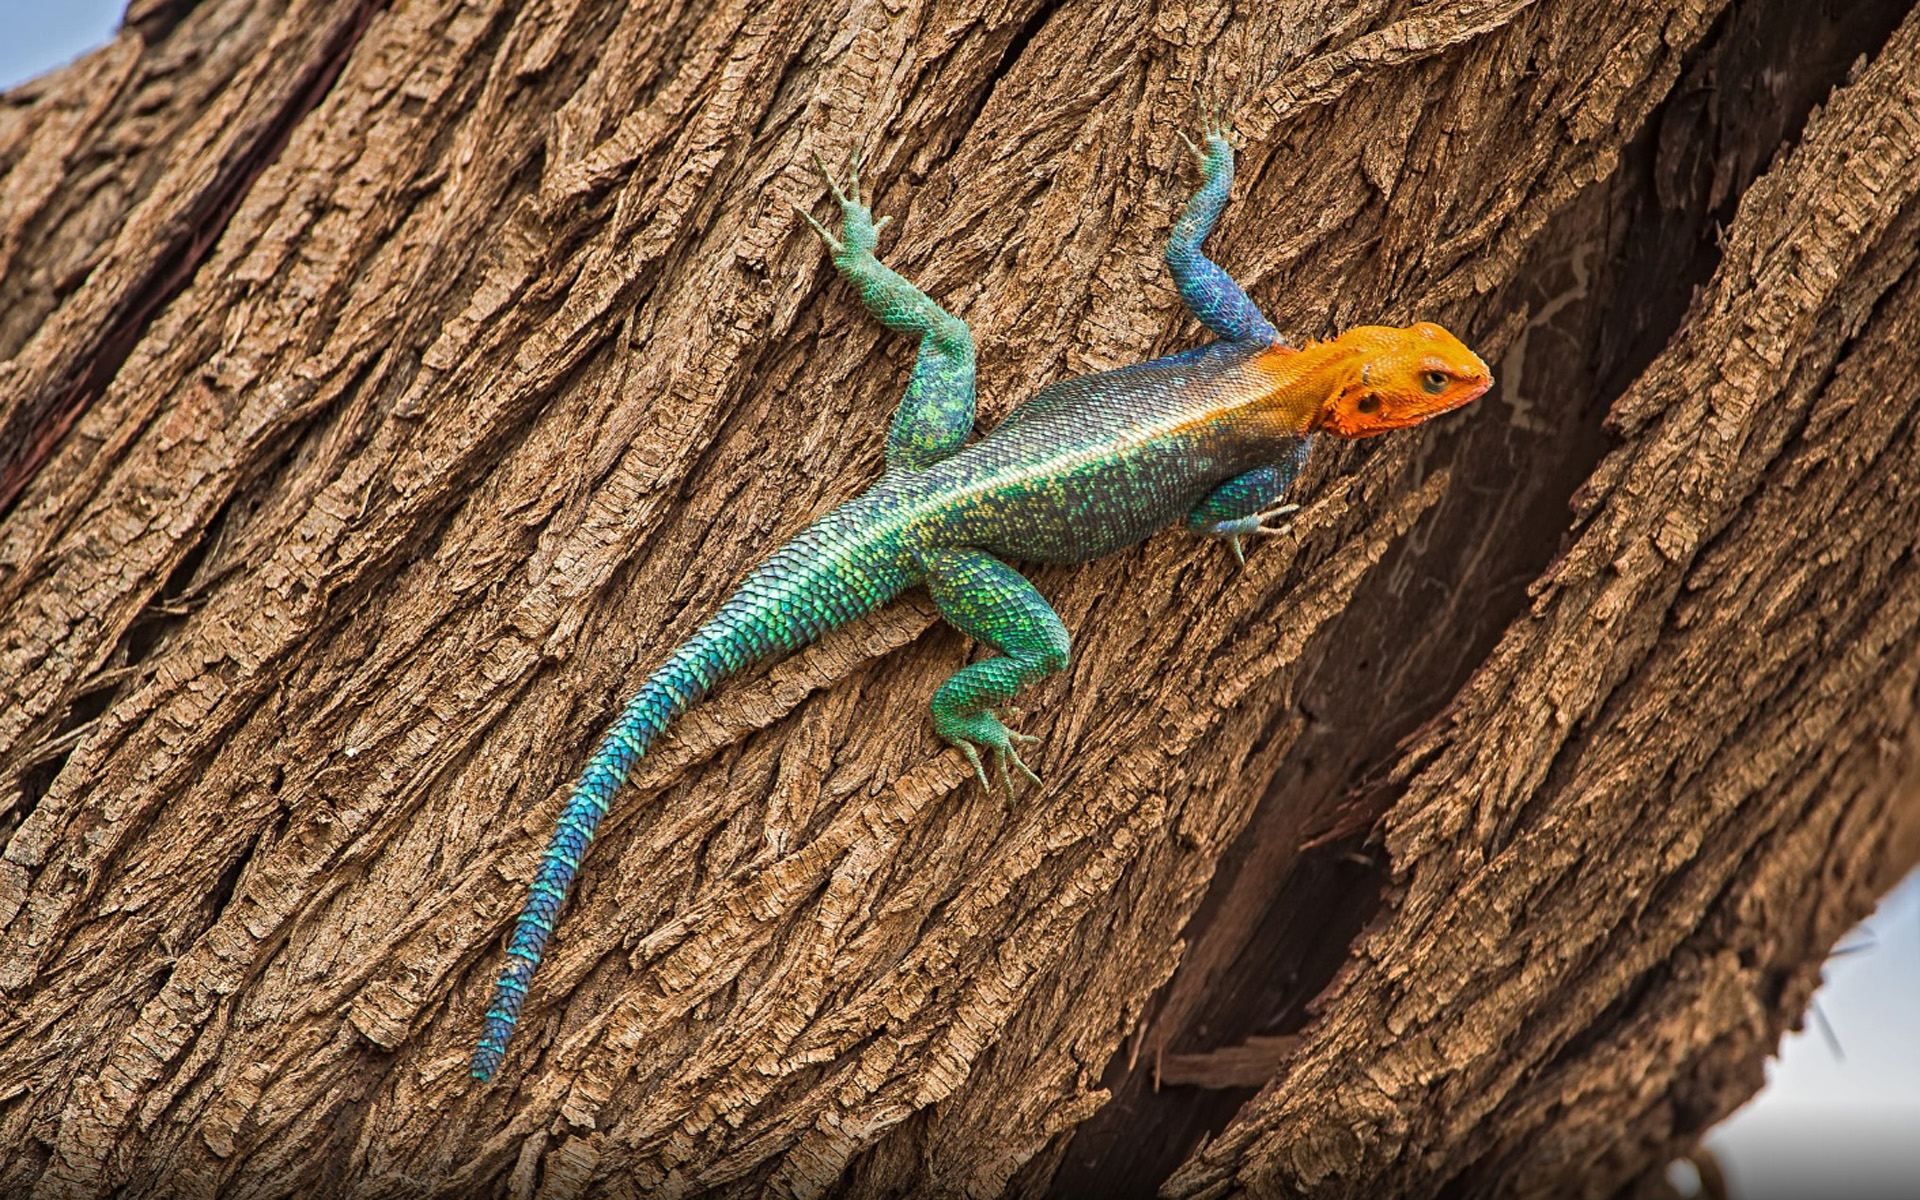 Agama Lizard On Tree In East Africa Lizard With Red Head